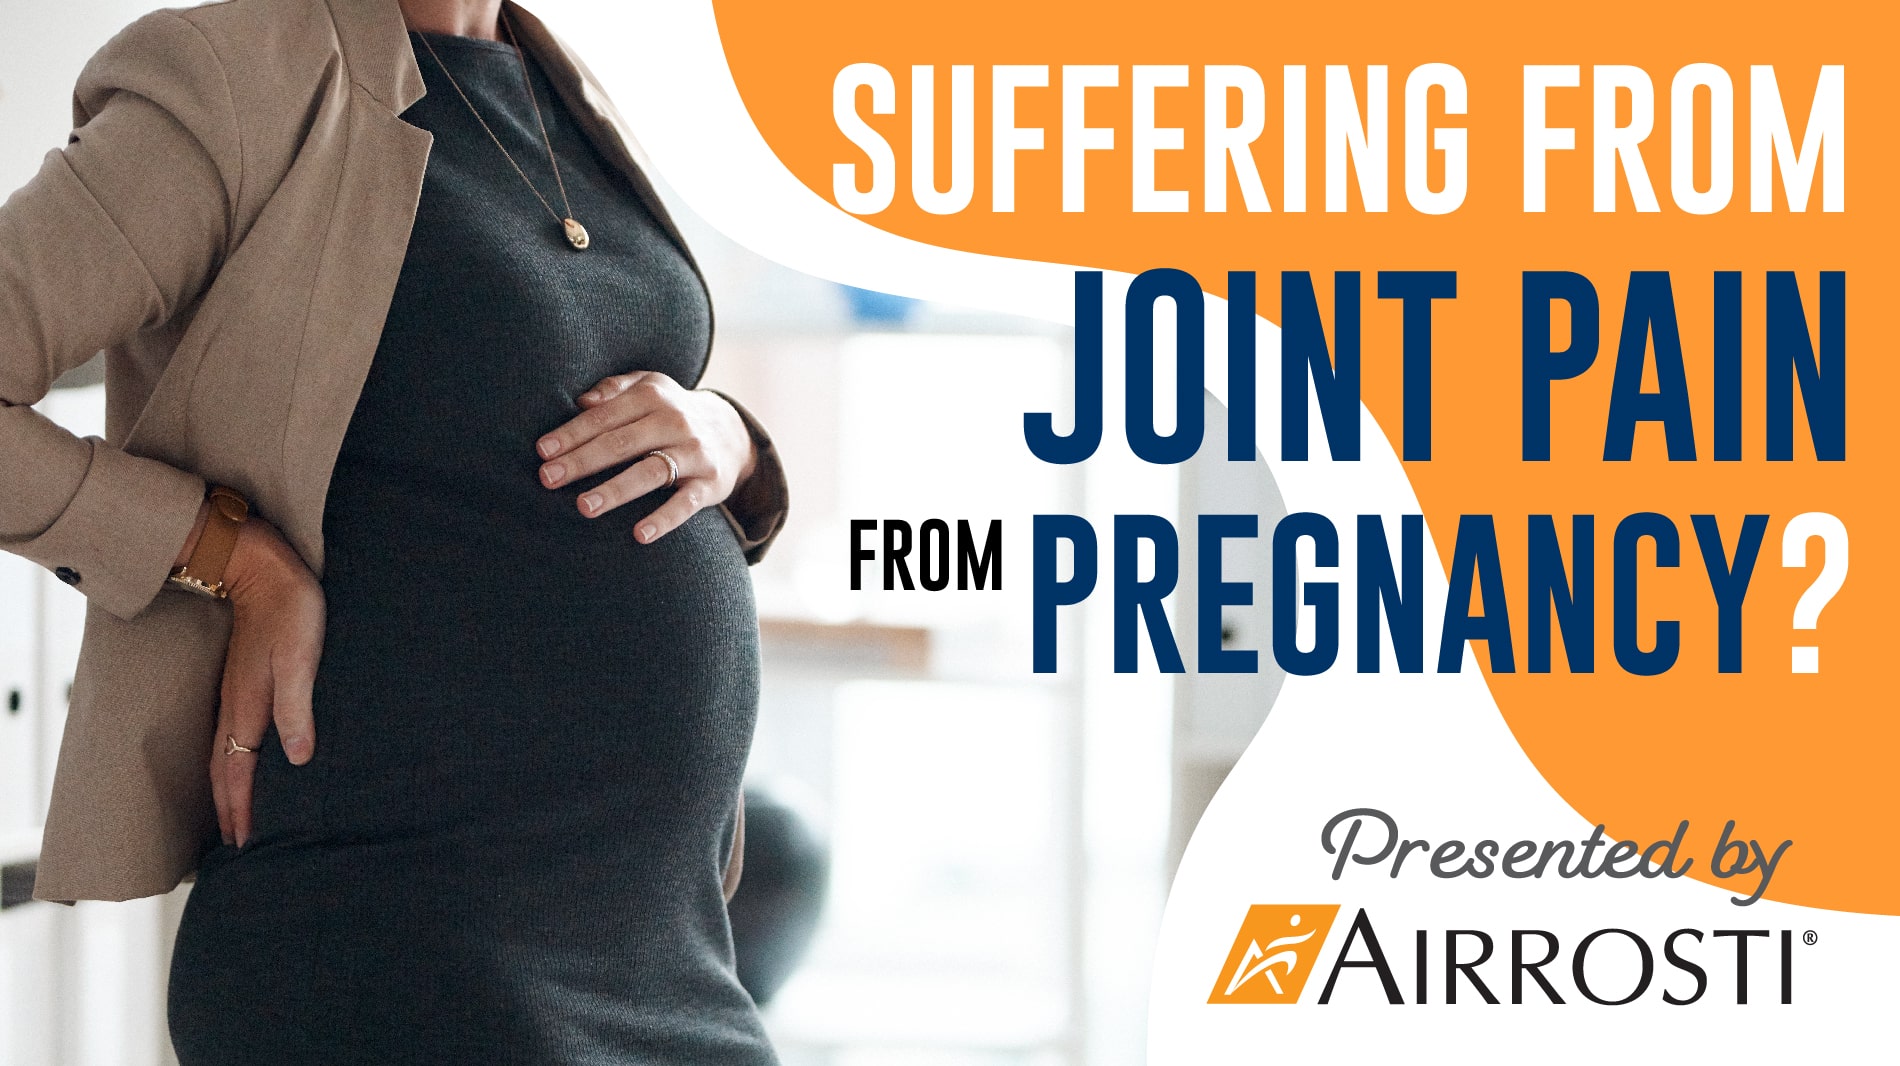 Suffering from Joint Pain from Pregnancy? Facts and Misconceptions Presented by Airrosti